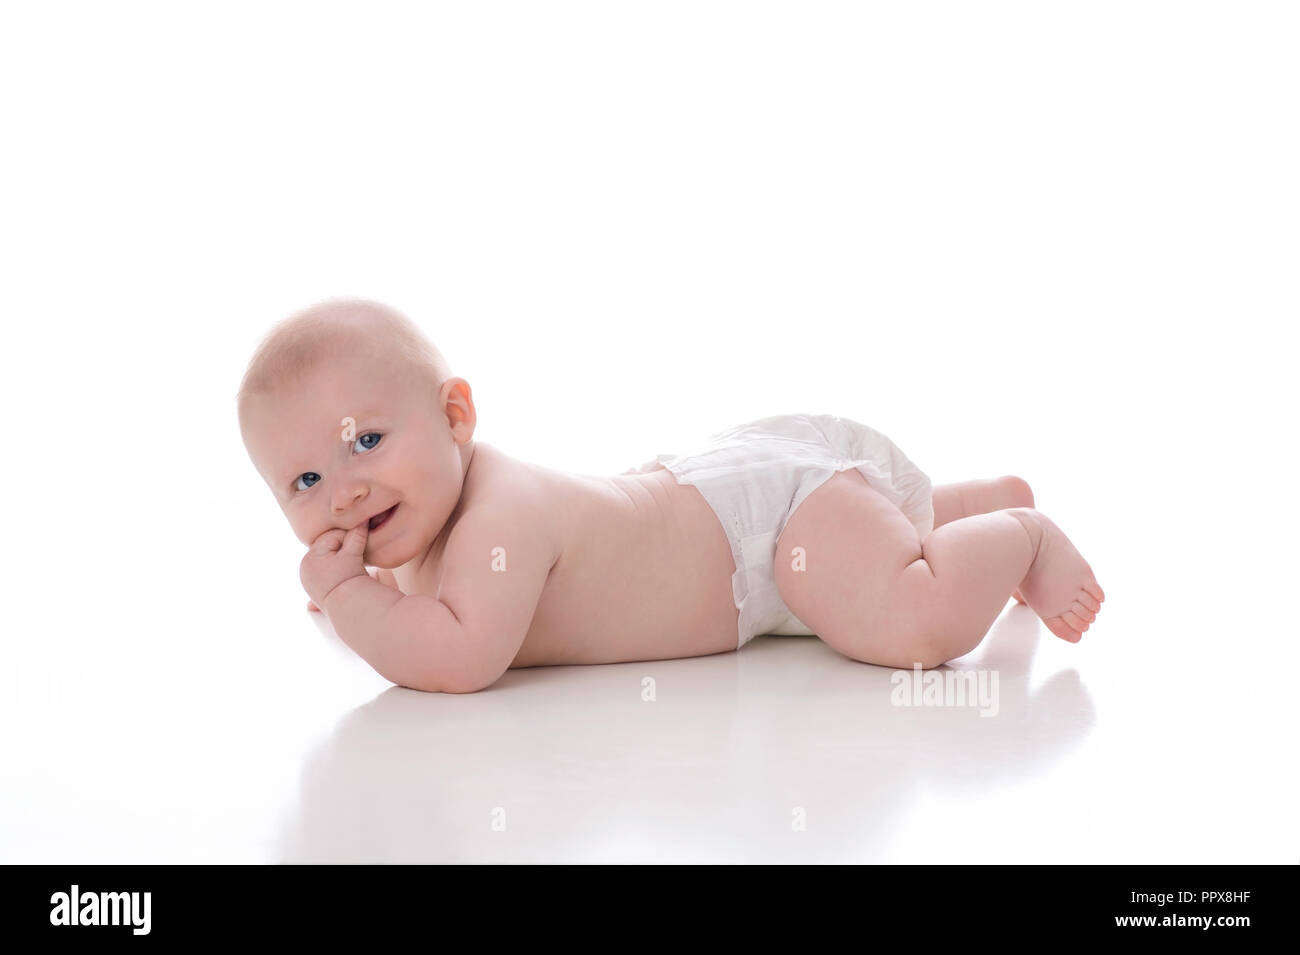 A 2 month old baby boy lying on his stomach on a white, seamless background. He is wearing a plain, white diaper and has his fingers in his mouth. He  Stock Photo